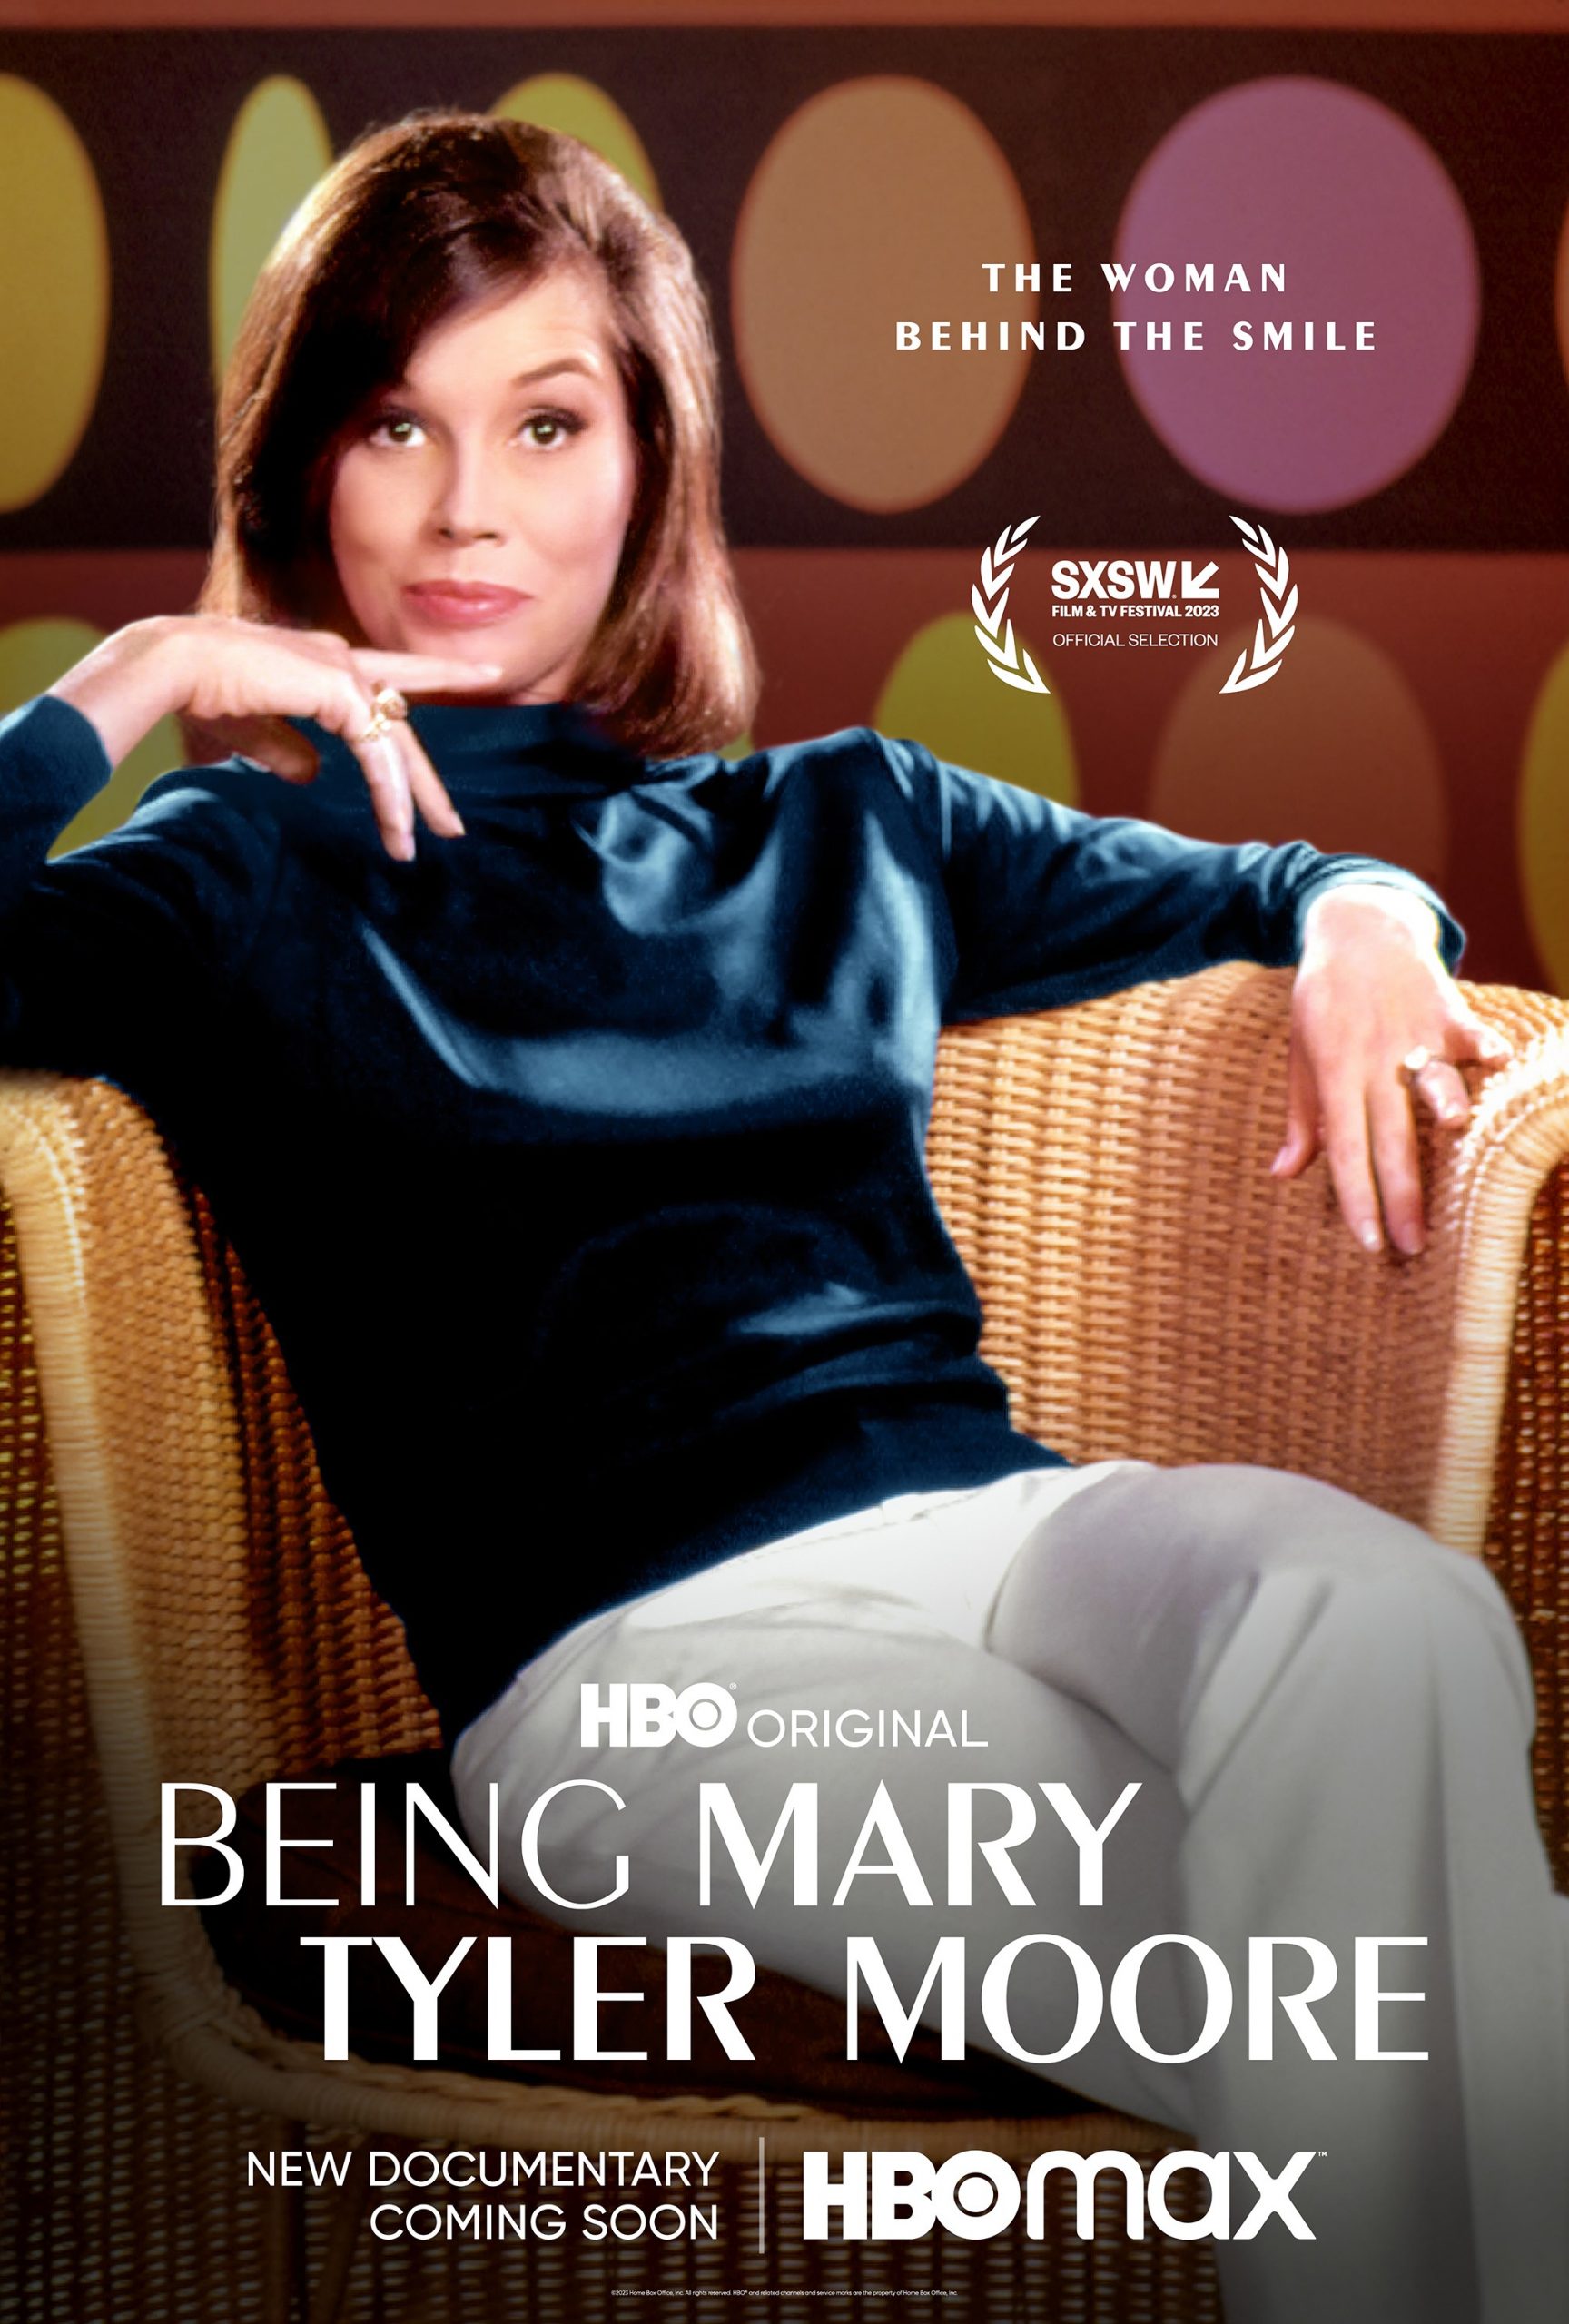 SXSW: Being Mary Tyler Moore